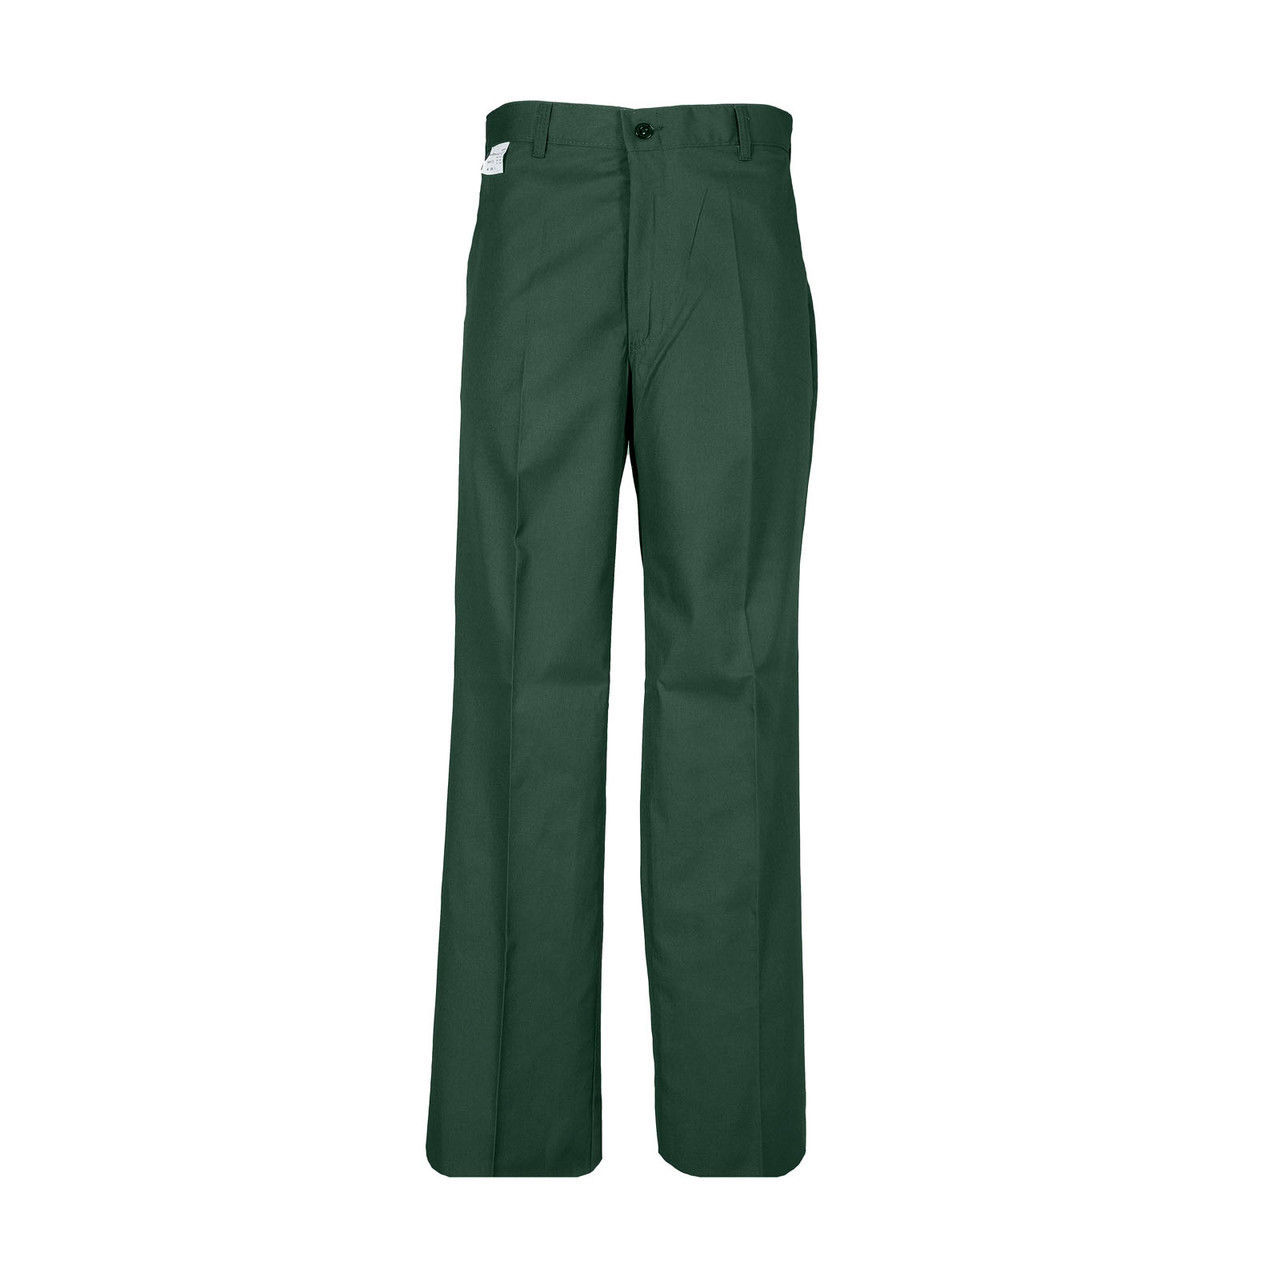 P20SP Men's Industrial Work Pant, Spruce Green Questions & Answers